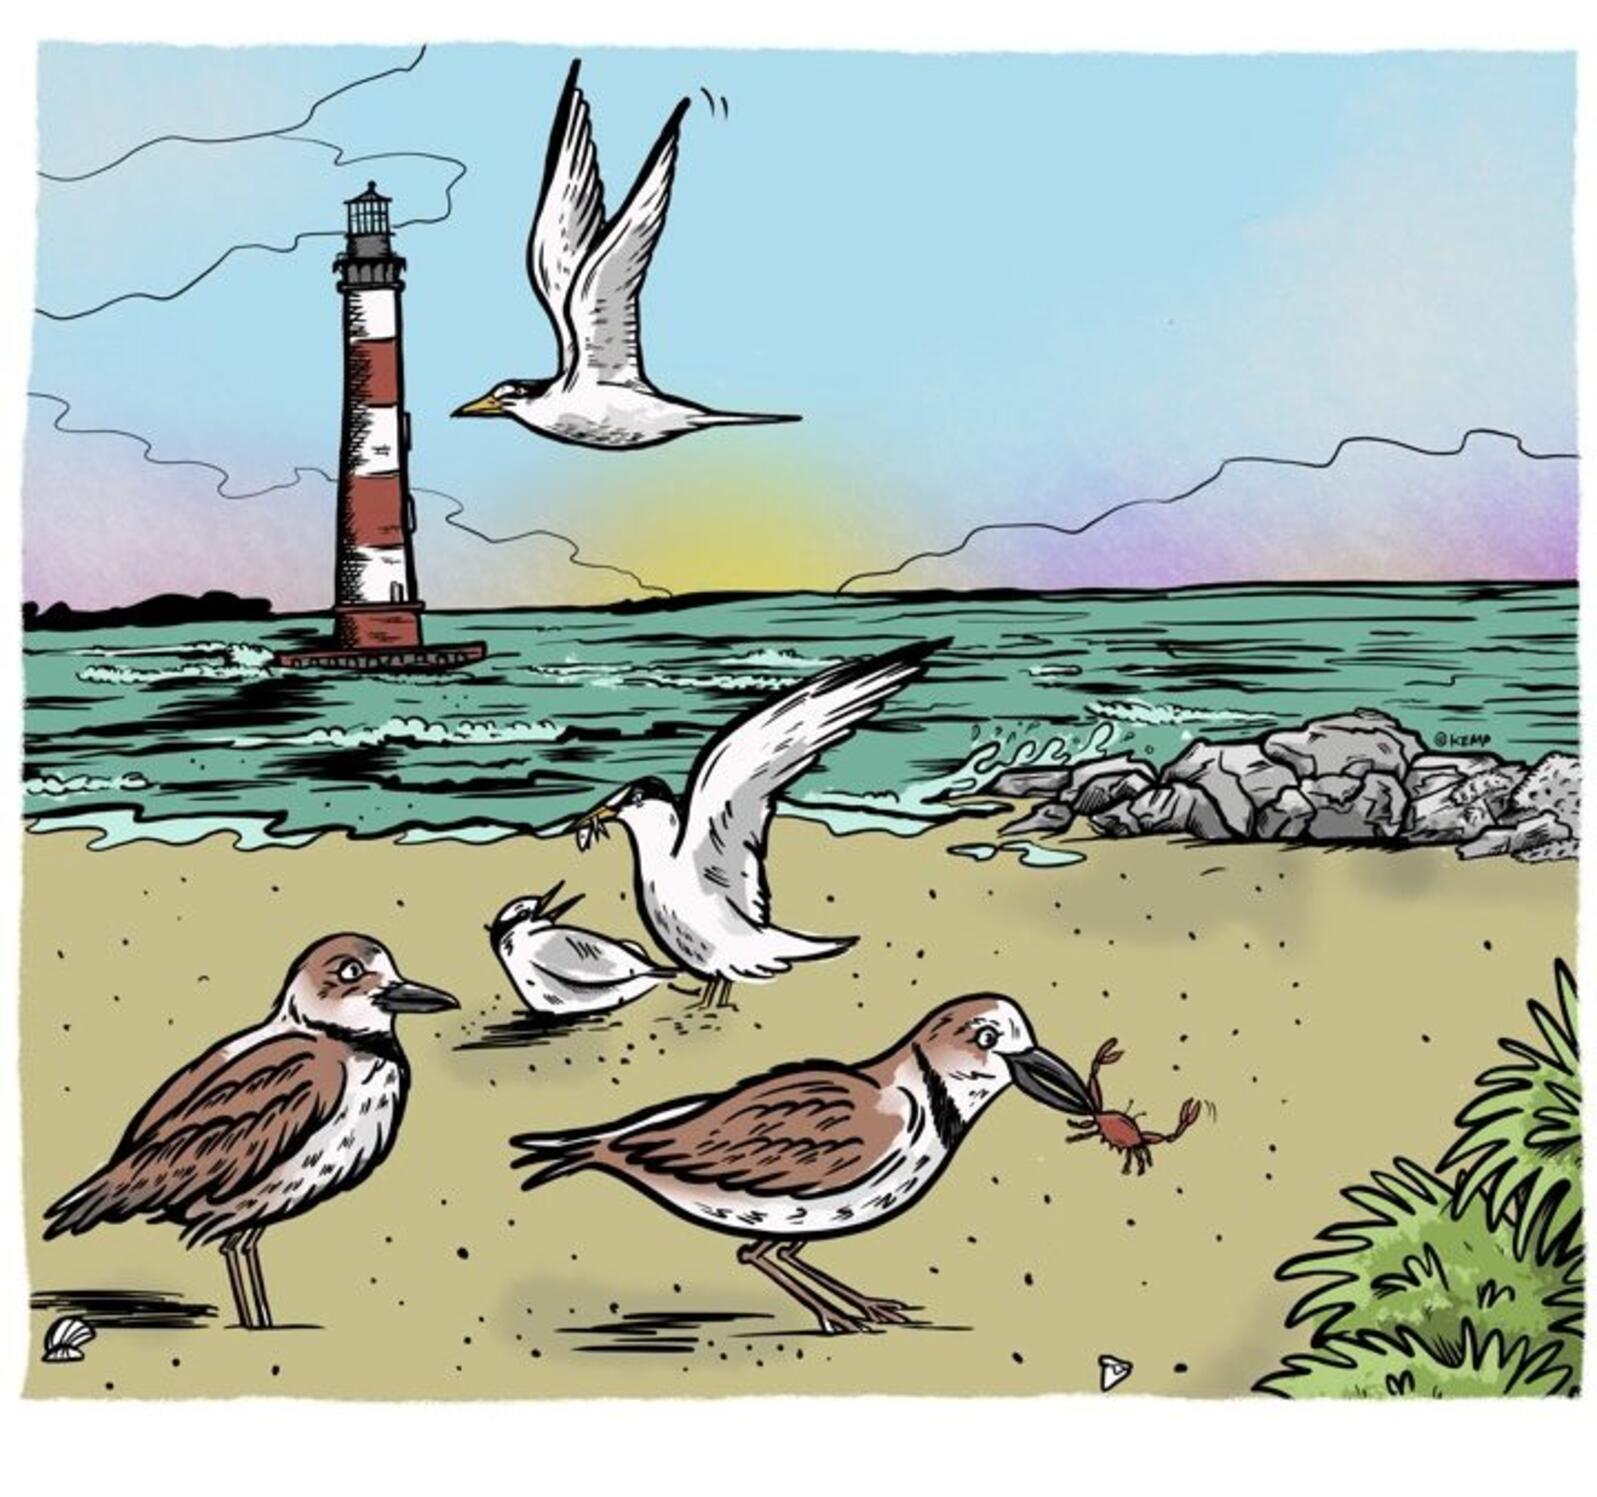 A colorful drawing of shorebirds on a beach with a lighthouse